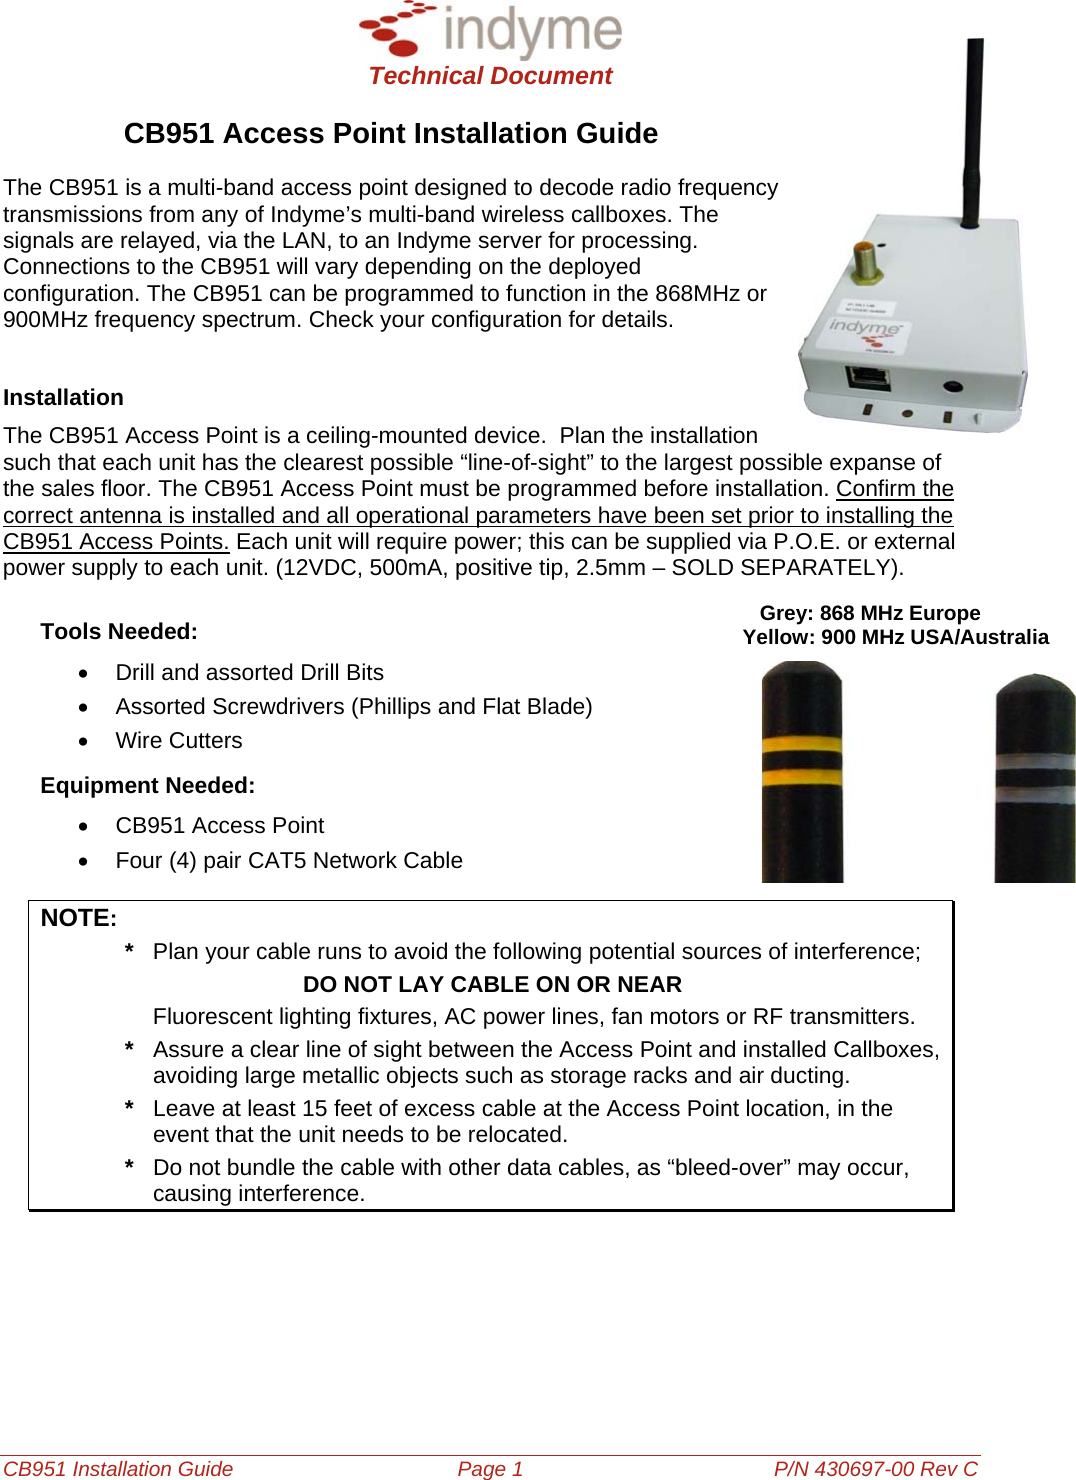  Technical Document  CB951 Installation Guide Page 1 P/N 430697-00 Rev C CB951 Access Point Installation Guide The CB951 is a multi-band access point designed to decode radio frequency transmissions from any of Indyme’s multi-band wireless callboxes. The signals are relayed, via the LAN, to an Indyme server for processing. Connections to the CB951 will vary depending on the deployed configuration. The CB951 can be programmed to function in the 868MHz or 900MHz frequency spectrum. Check your configuration for details.   Installation The CB951 Access Point is a ceiling-mounted device.  Plan the installation such that each unit has the clearest possible “line-of-sight” to the largest possible expanse of the sales floor. The CB951 Access Point must be programmed before installation. Confirm the correct antenna is installed and all operational parameters have been set prior to installing the CB951 Access Points. Each unit will require power; this can be supplied via P.O.E. or external power supply to each unit. (12VDC, 500mA, positive tip, 2.5mm – SOLD SEPARATELY). Tools Needed: •  Drill and assorted Drill Bits •  Assorted Screwdrivers (Phillips and Flat Blade) • Wire Cutters Equipment Needed: •  CB951 Access Point •  Four (4) pair CAT5 Network Cable NOTE:     Grey: 868 MHz Europe Yellow: 900 MHz USA/Australia  *  Plan your cable runs to avoid the following potential sources of interference;          DO NOT LAY CABLE ON OR NEAR   Fluorescent lighting fixtures, AC power lines, fan motors or RF transmitters.  *  Assure a clear line of sight between the Access Point and installed Callboxes, avoiding large metallic objects such as storage racks and air ducting.  *  Leave at least 15 feet of excess cable at the Access Point location, in the event that the unit needs to be relocated.  *  Do not bundle the cable with other data cables, as “bleed-over” may occur, causing interference.  